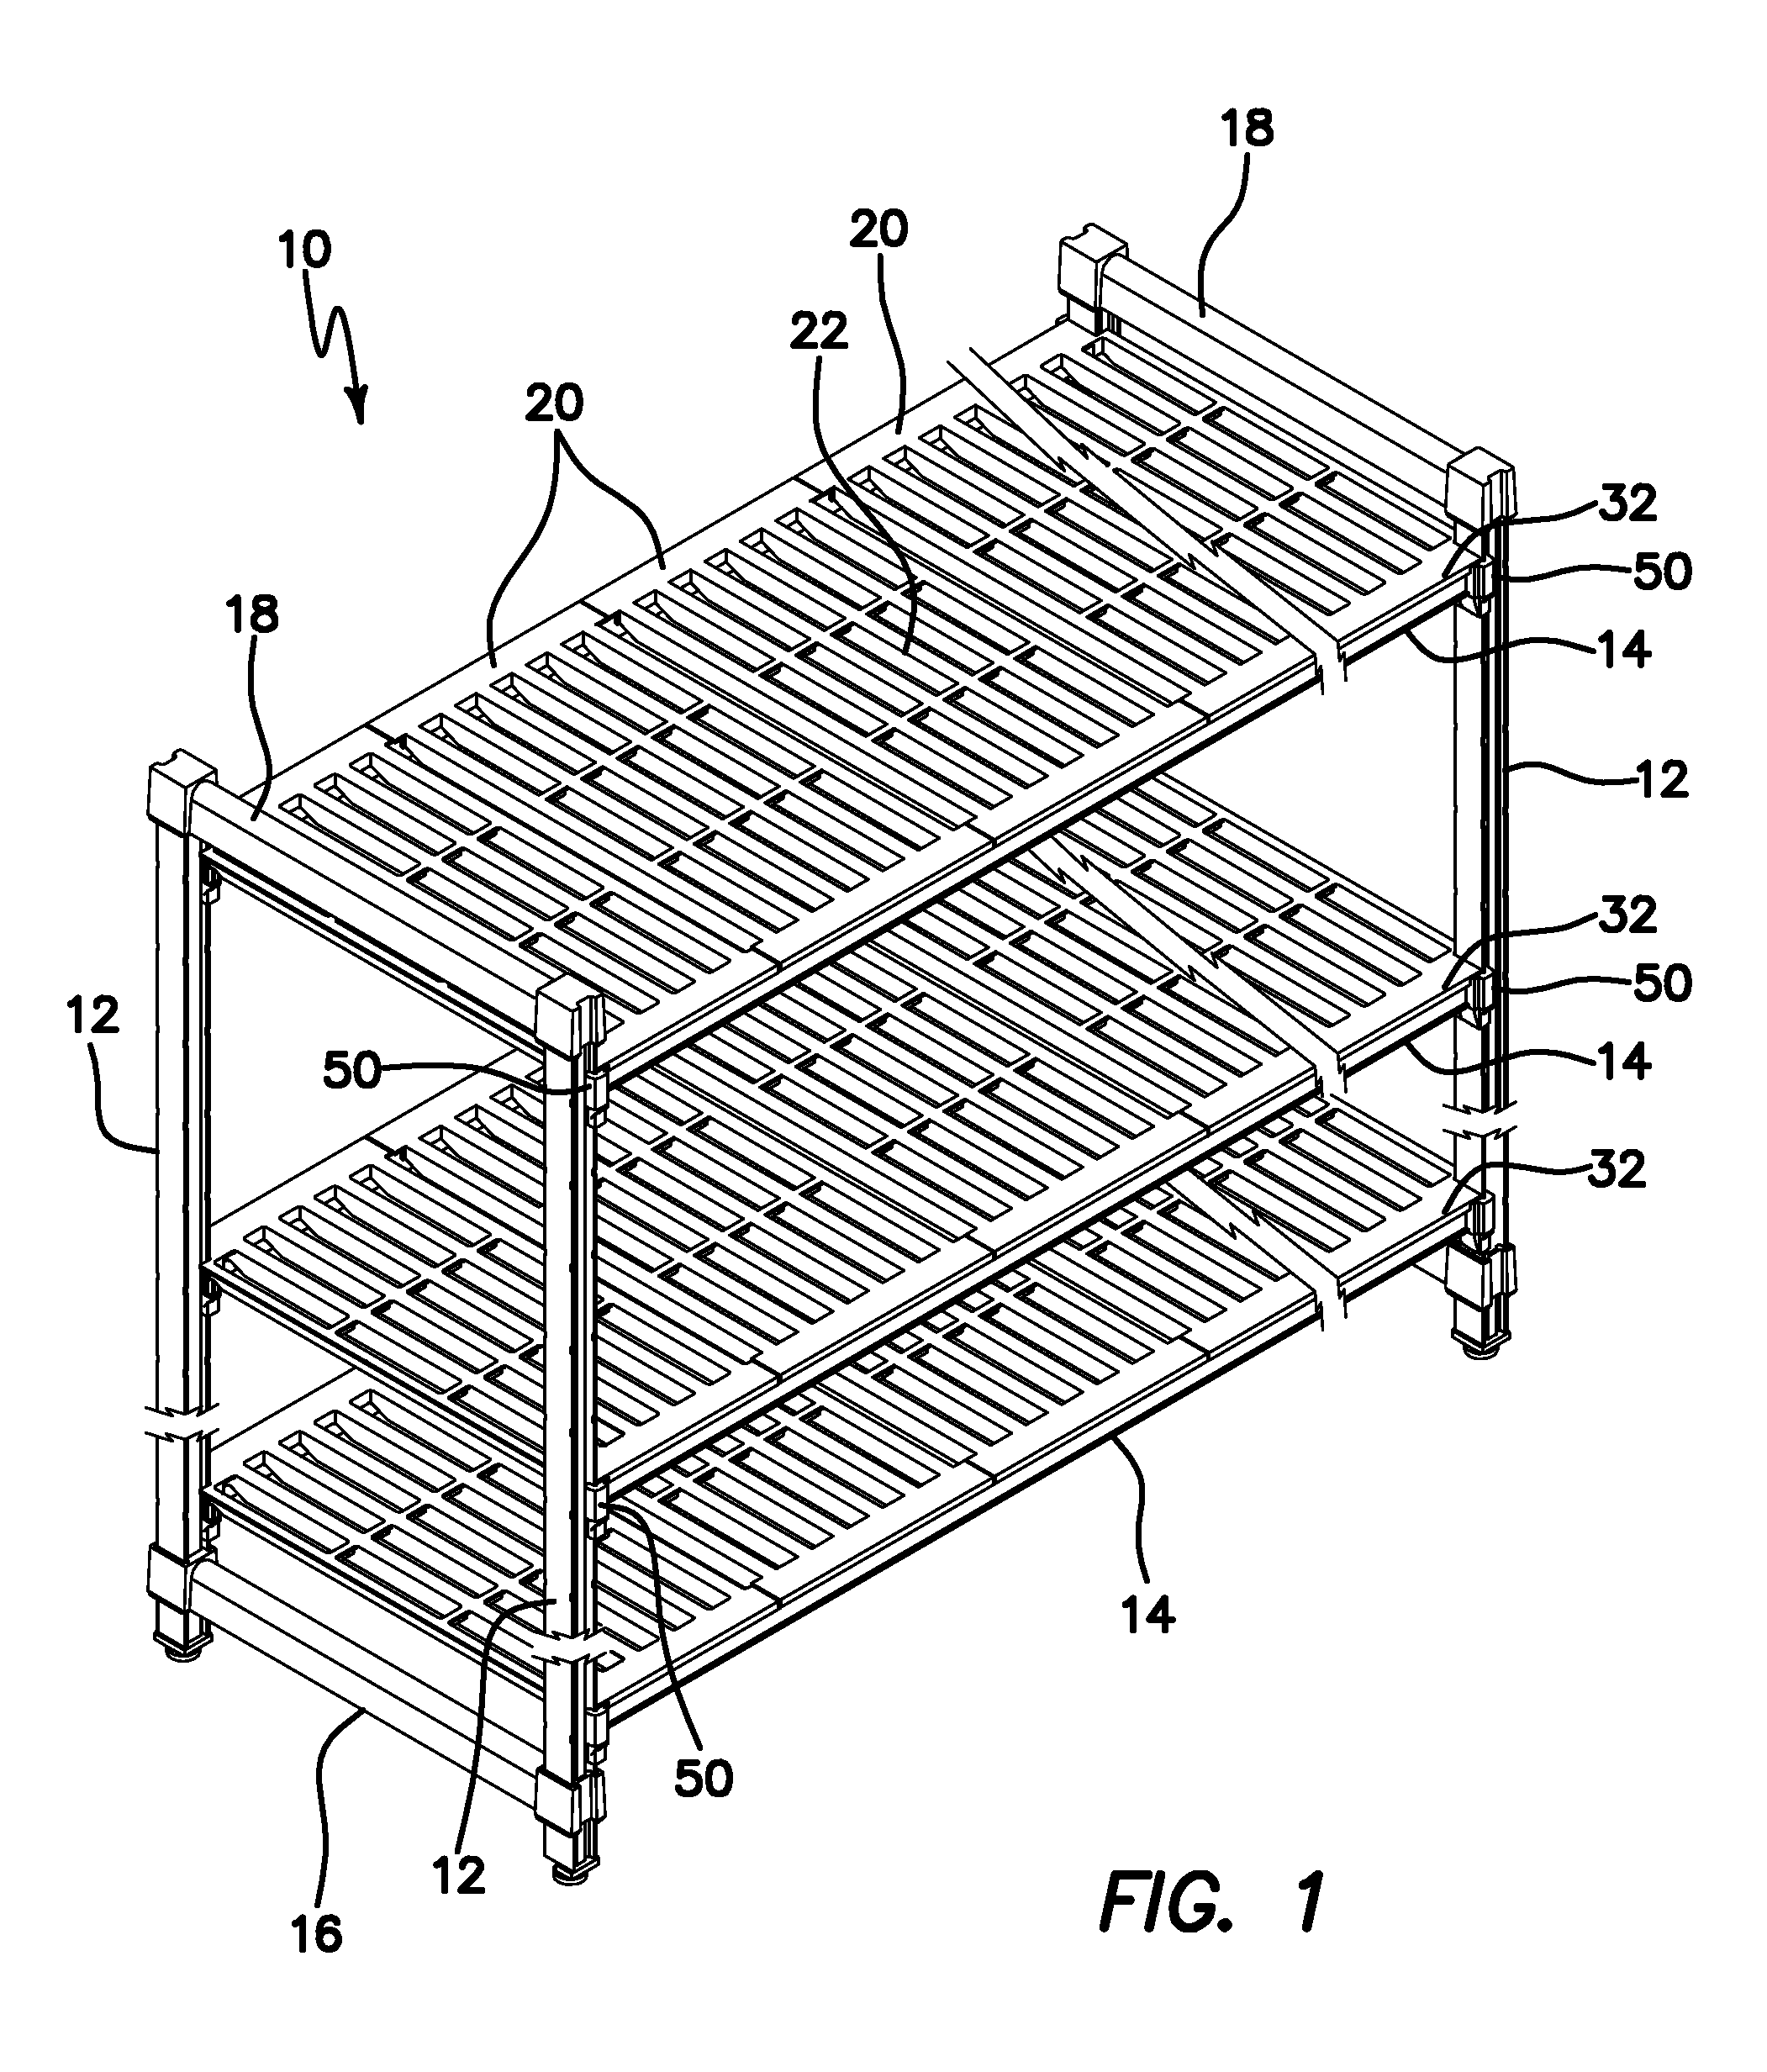 Pultruded scalable shelving system